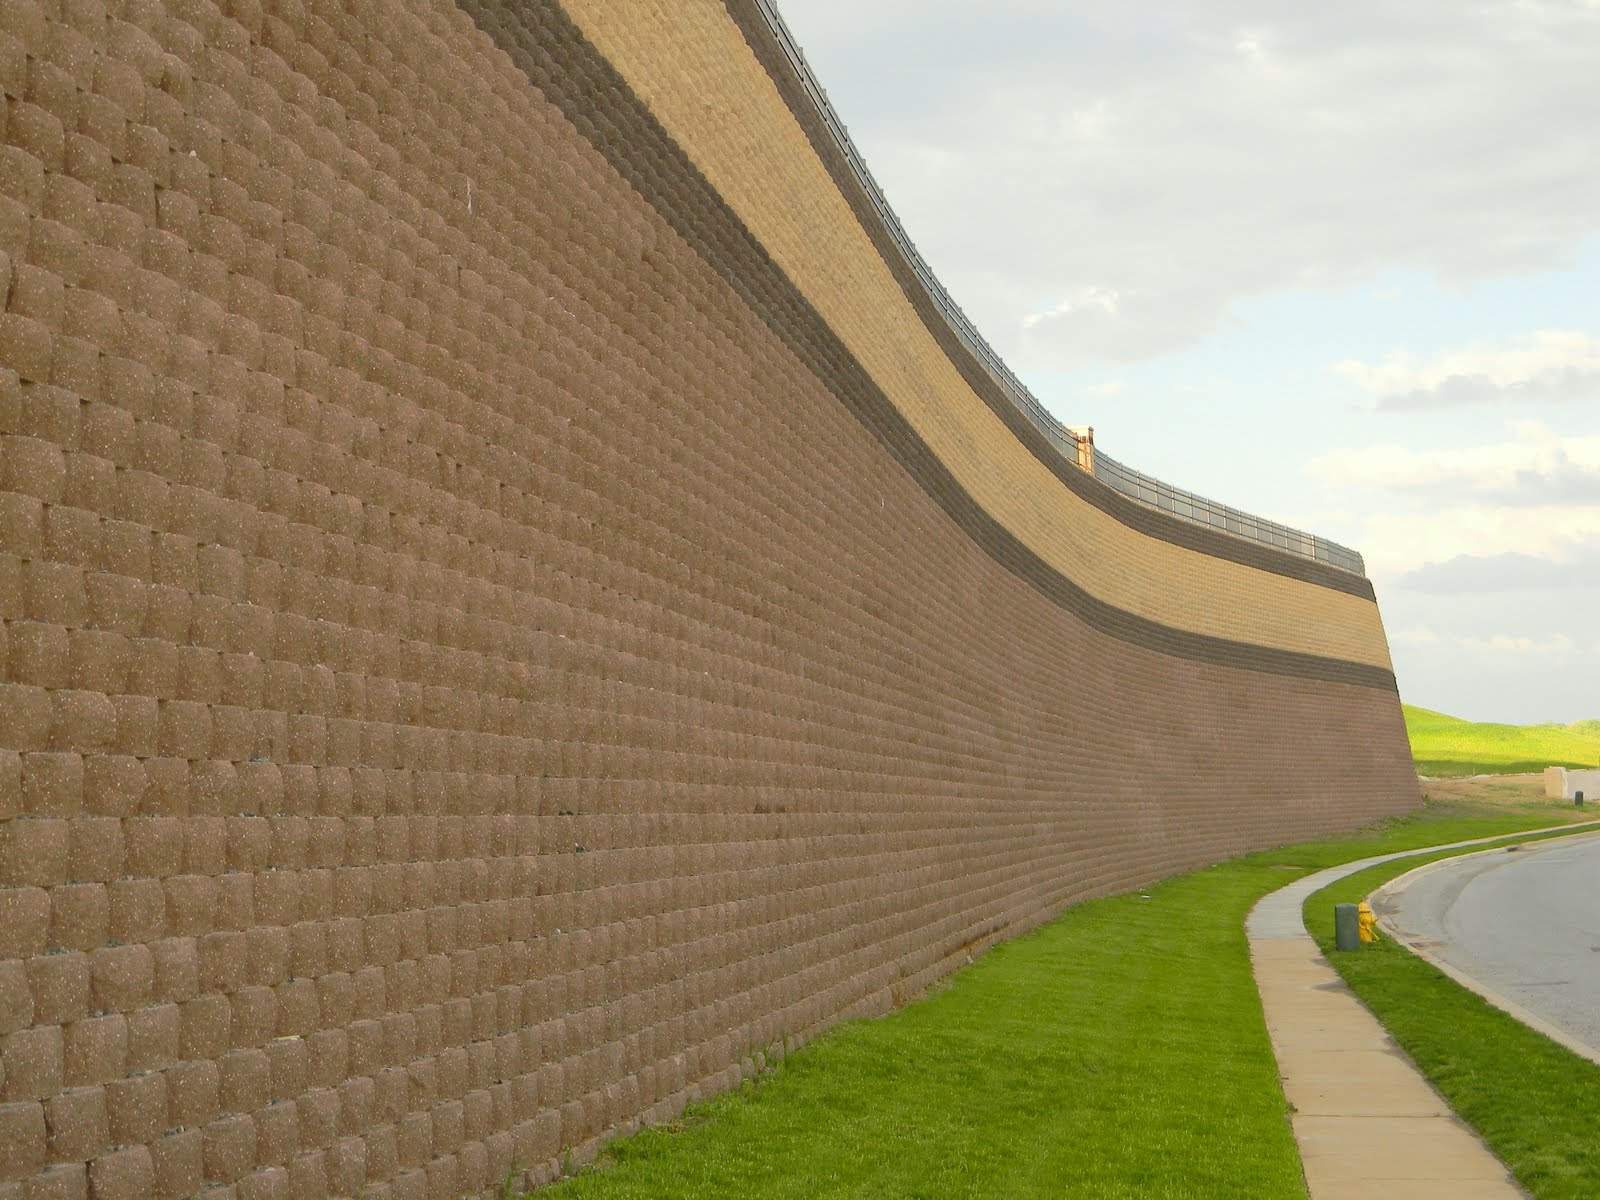 This enormous keystone retaining wall in Abingdon Maryland was built by Griffith Brothers Inc. (410-683-8885) with Keystone Standard units manufactured York Building Products (www.yorkbuilding.com). The colors used were buff, light brown and dark brown.